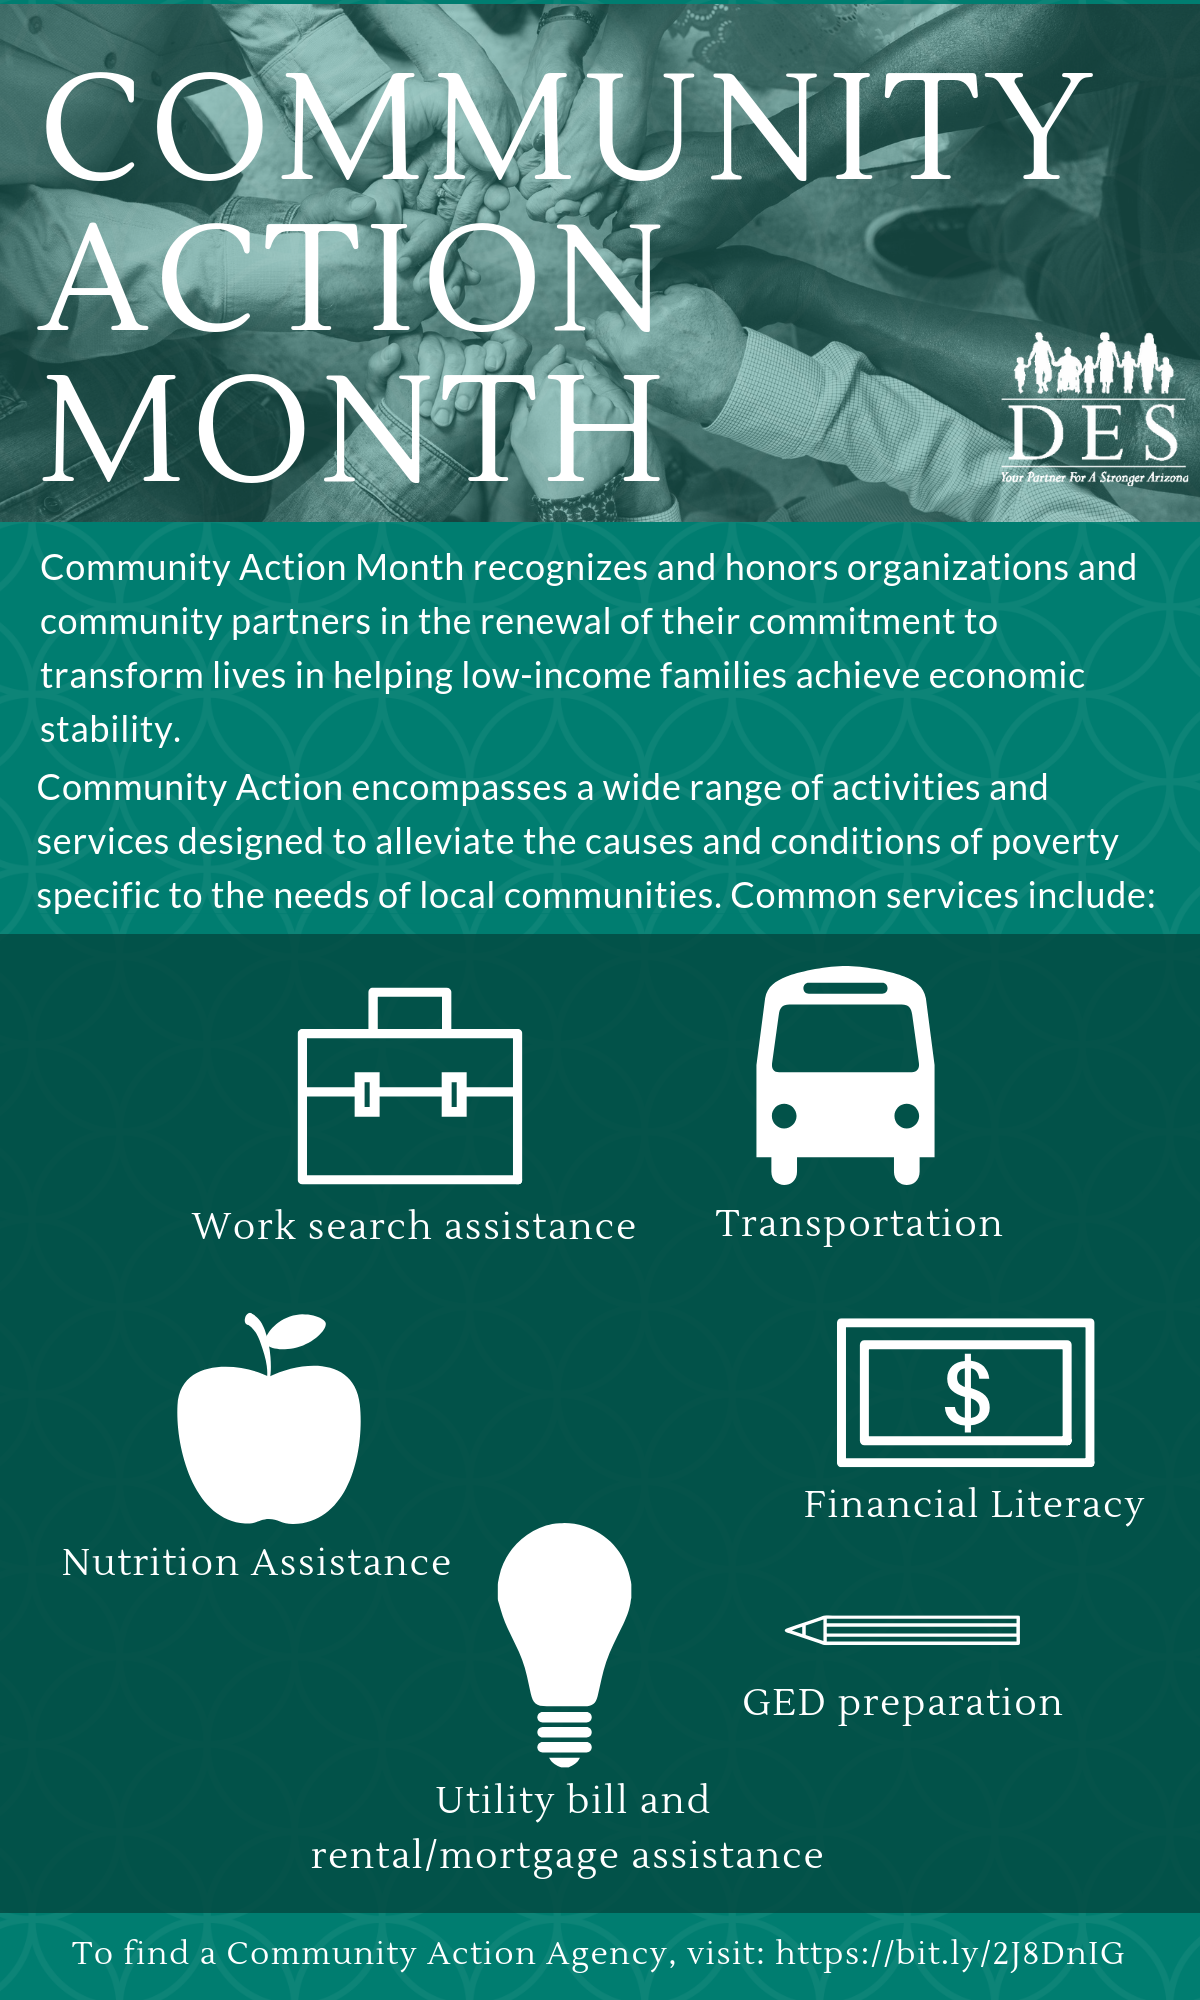 Facts and figures about Community Action Month